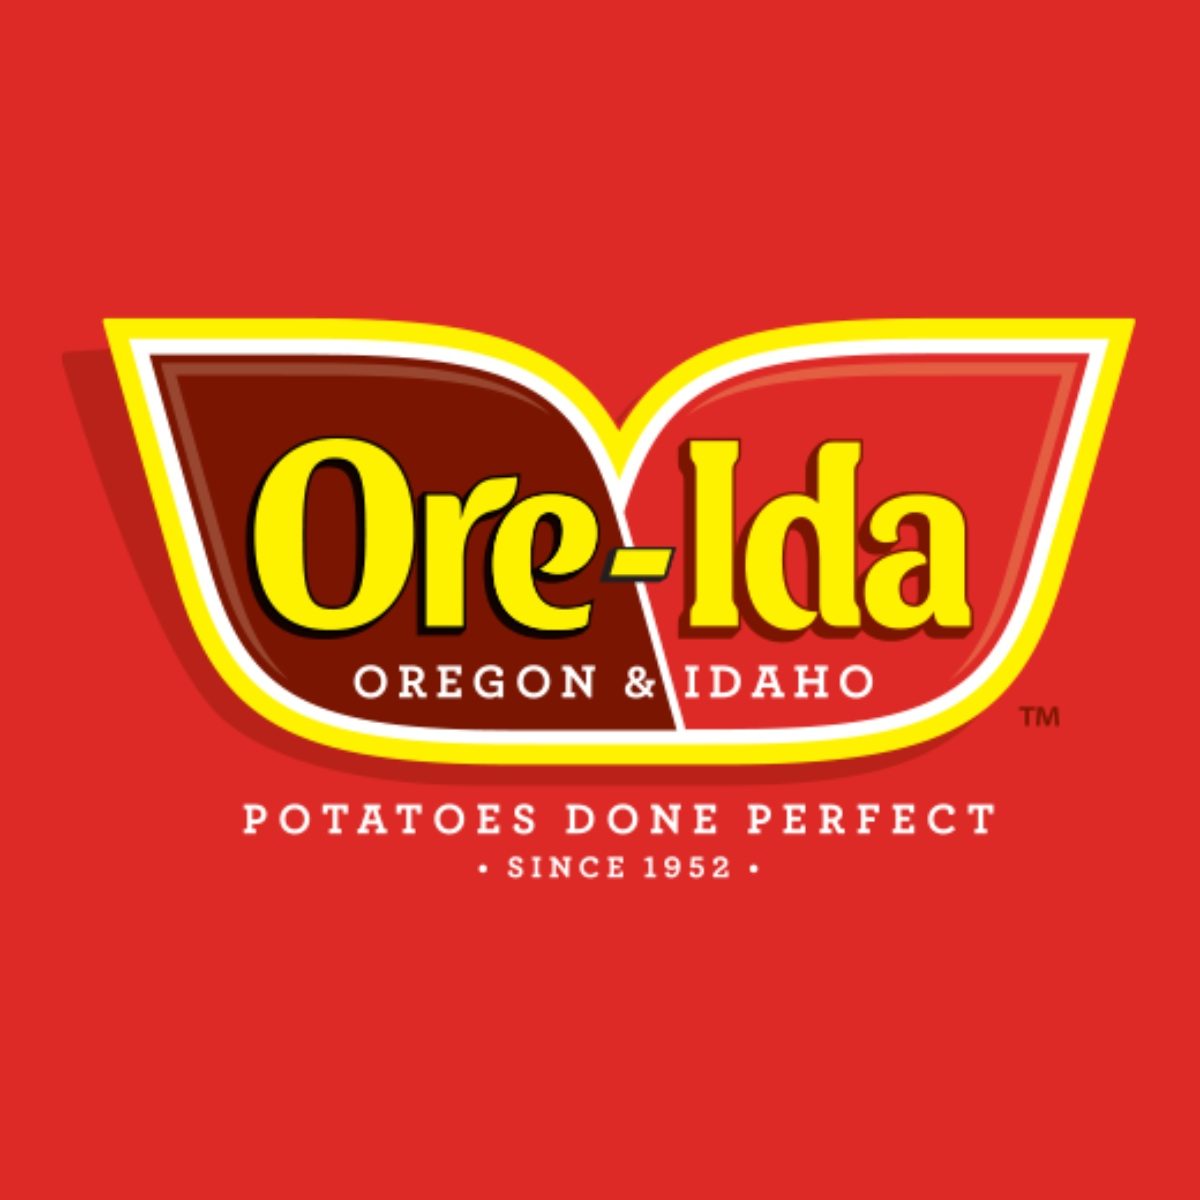 <p class=""><strong><a class="SWhtmlLink" href="http://www.oreida.com/default.aspx" rel="noopener">Ore-Ida</a>, Boise</strong></p> <p>The founders of Ore-Ida originally started their company working with frozen corn, but when they expanded to potatoes they couldn't figure out how to freeze them. After a few experiments, they accidentally invented tater tots, a product that made them significantly more famous than corn!</p> <p><a class="SWhtmlLink" href="https://www.tasteofhome.com/collection/top-10-tater-tot-recipes/" rel="noopener">Check out our top 10 favorite Tater Tot recipes.</a></p>